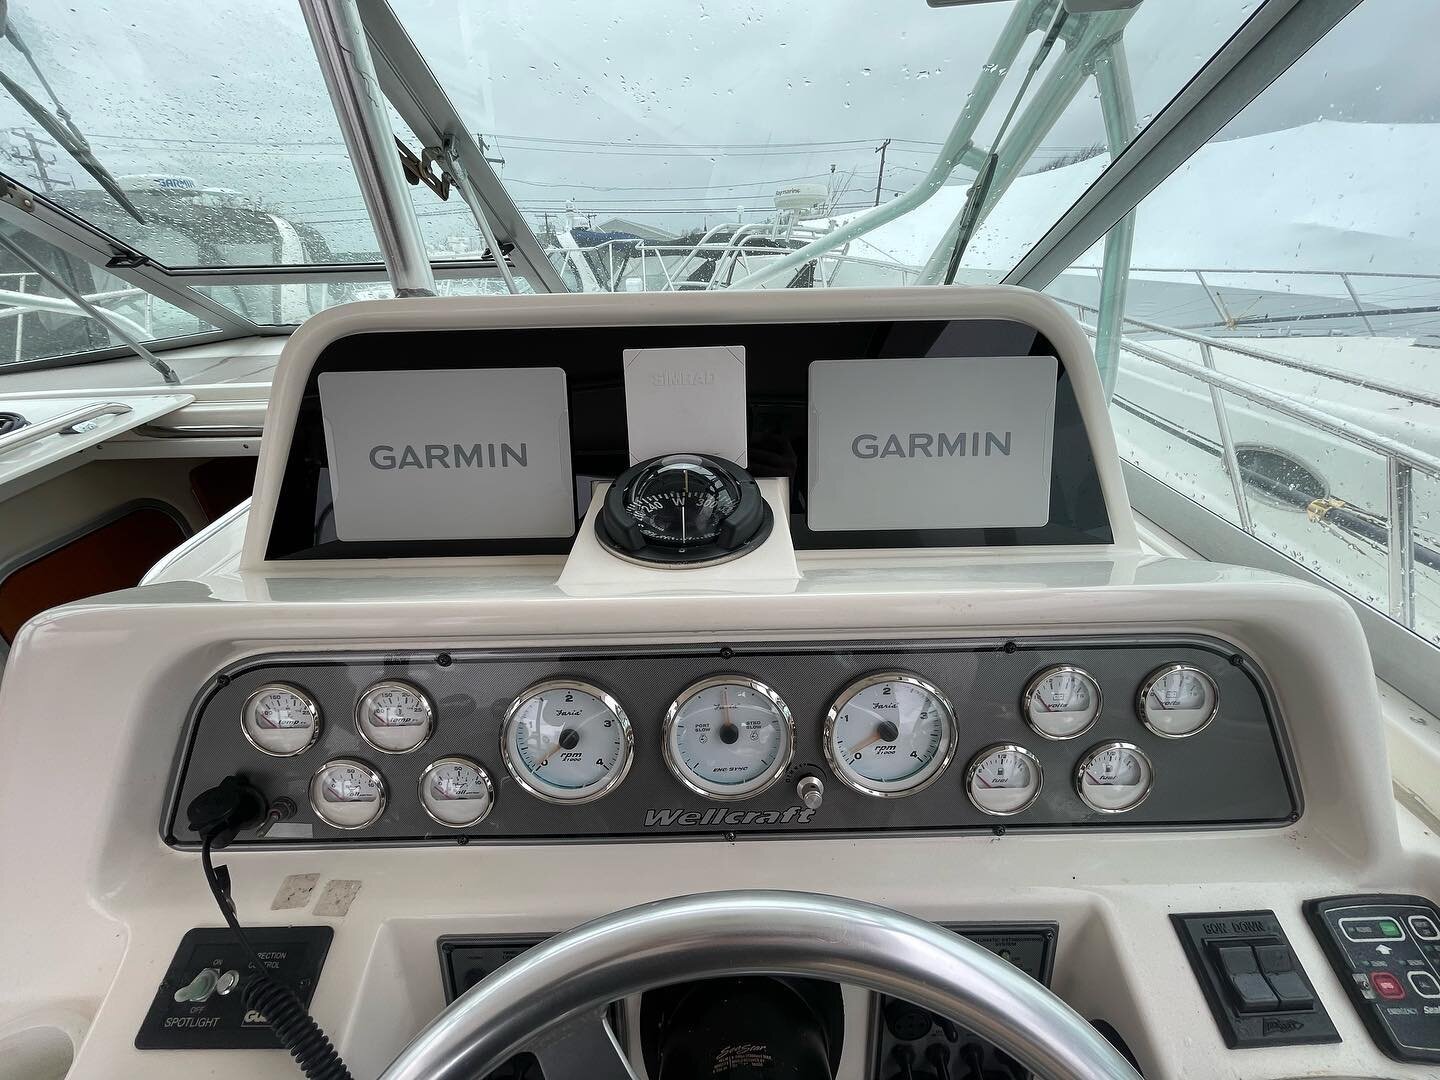 We now offer laser cut and engraved acrylic panels done IN HOUSE to compliment any upgrades you may do on your boat. Ditch the starboard and the sloppy cuts 

Give us a call for a quote today.